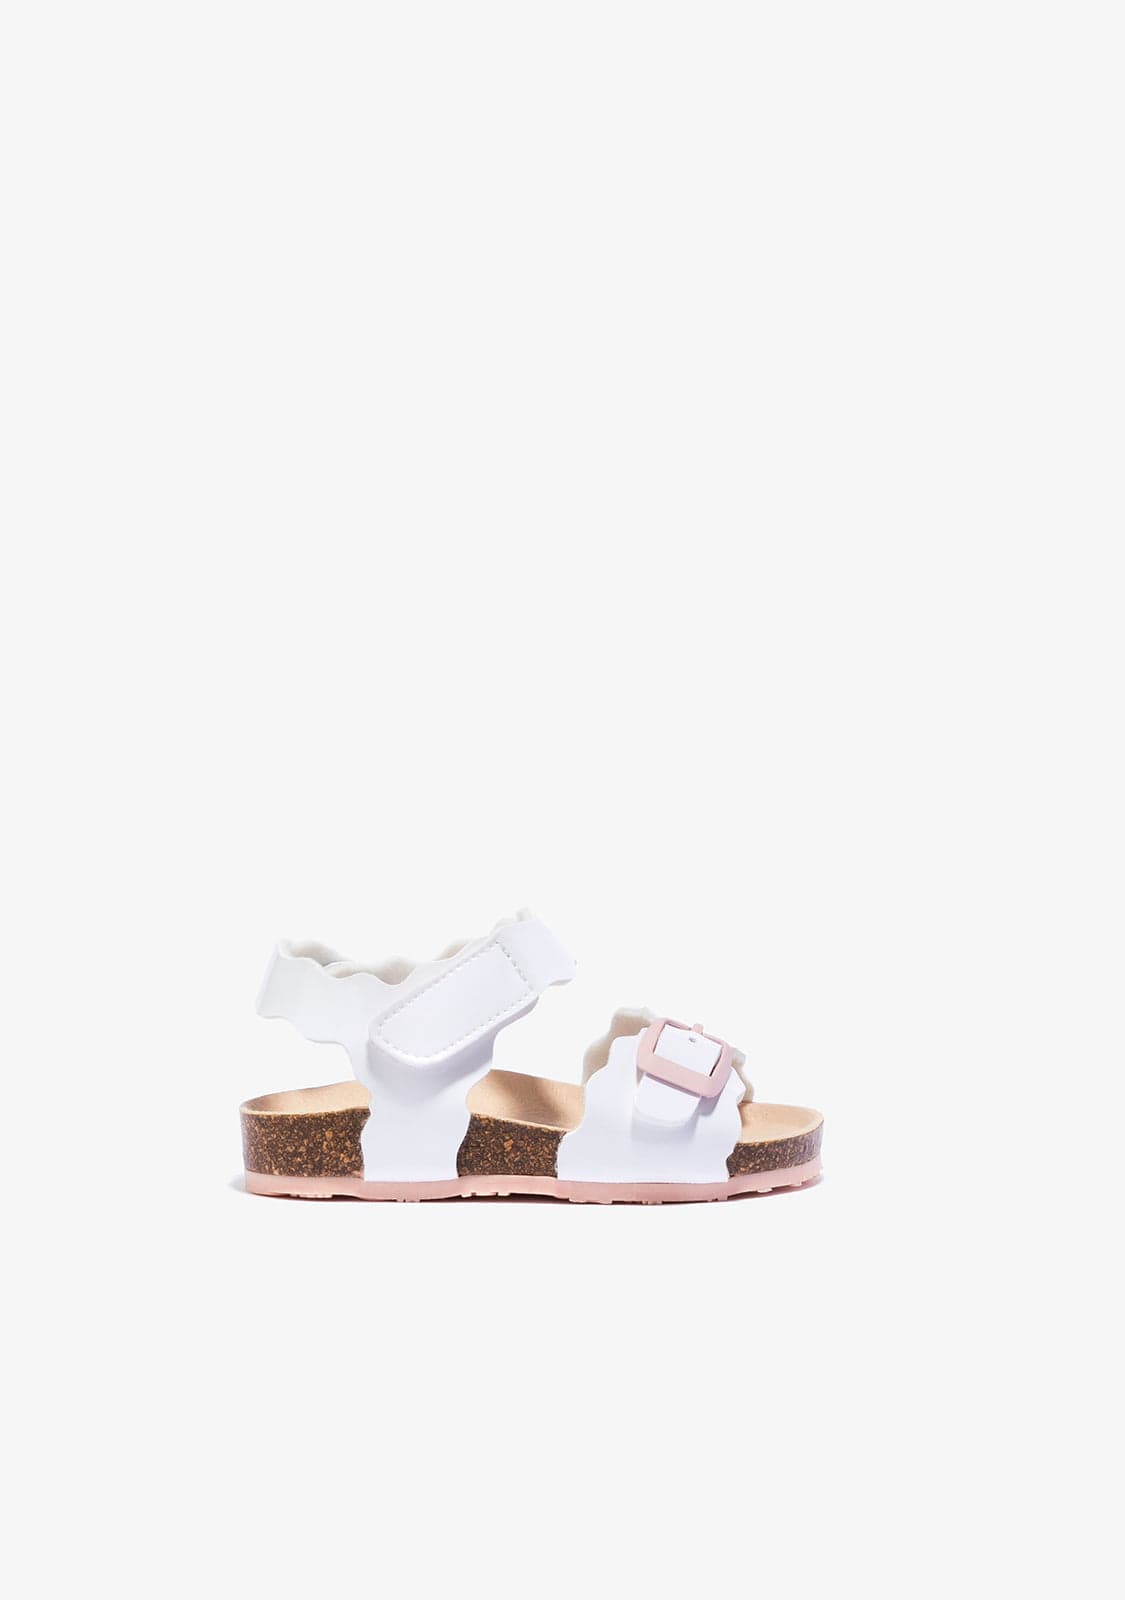 OSITO Shoes Baby's White Bio Sandals Patent Leather